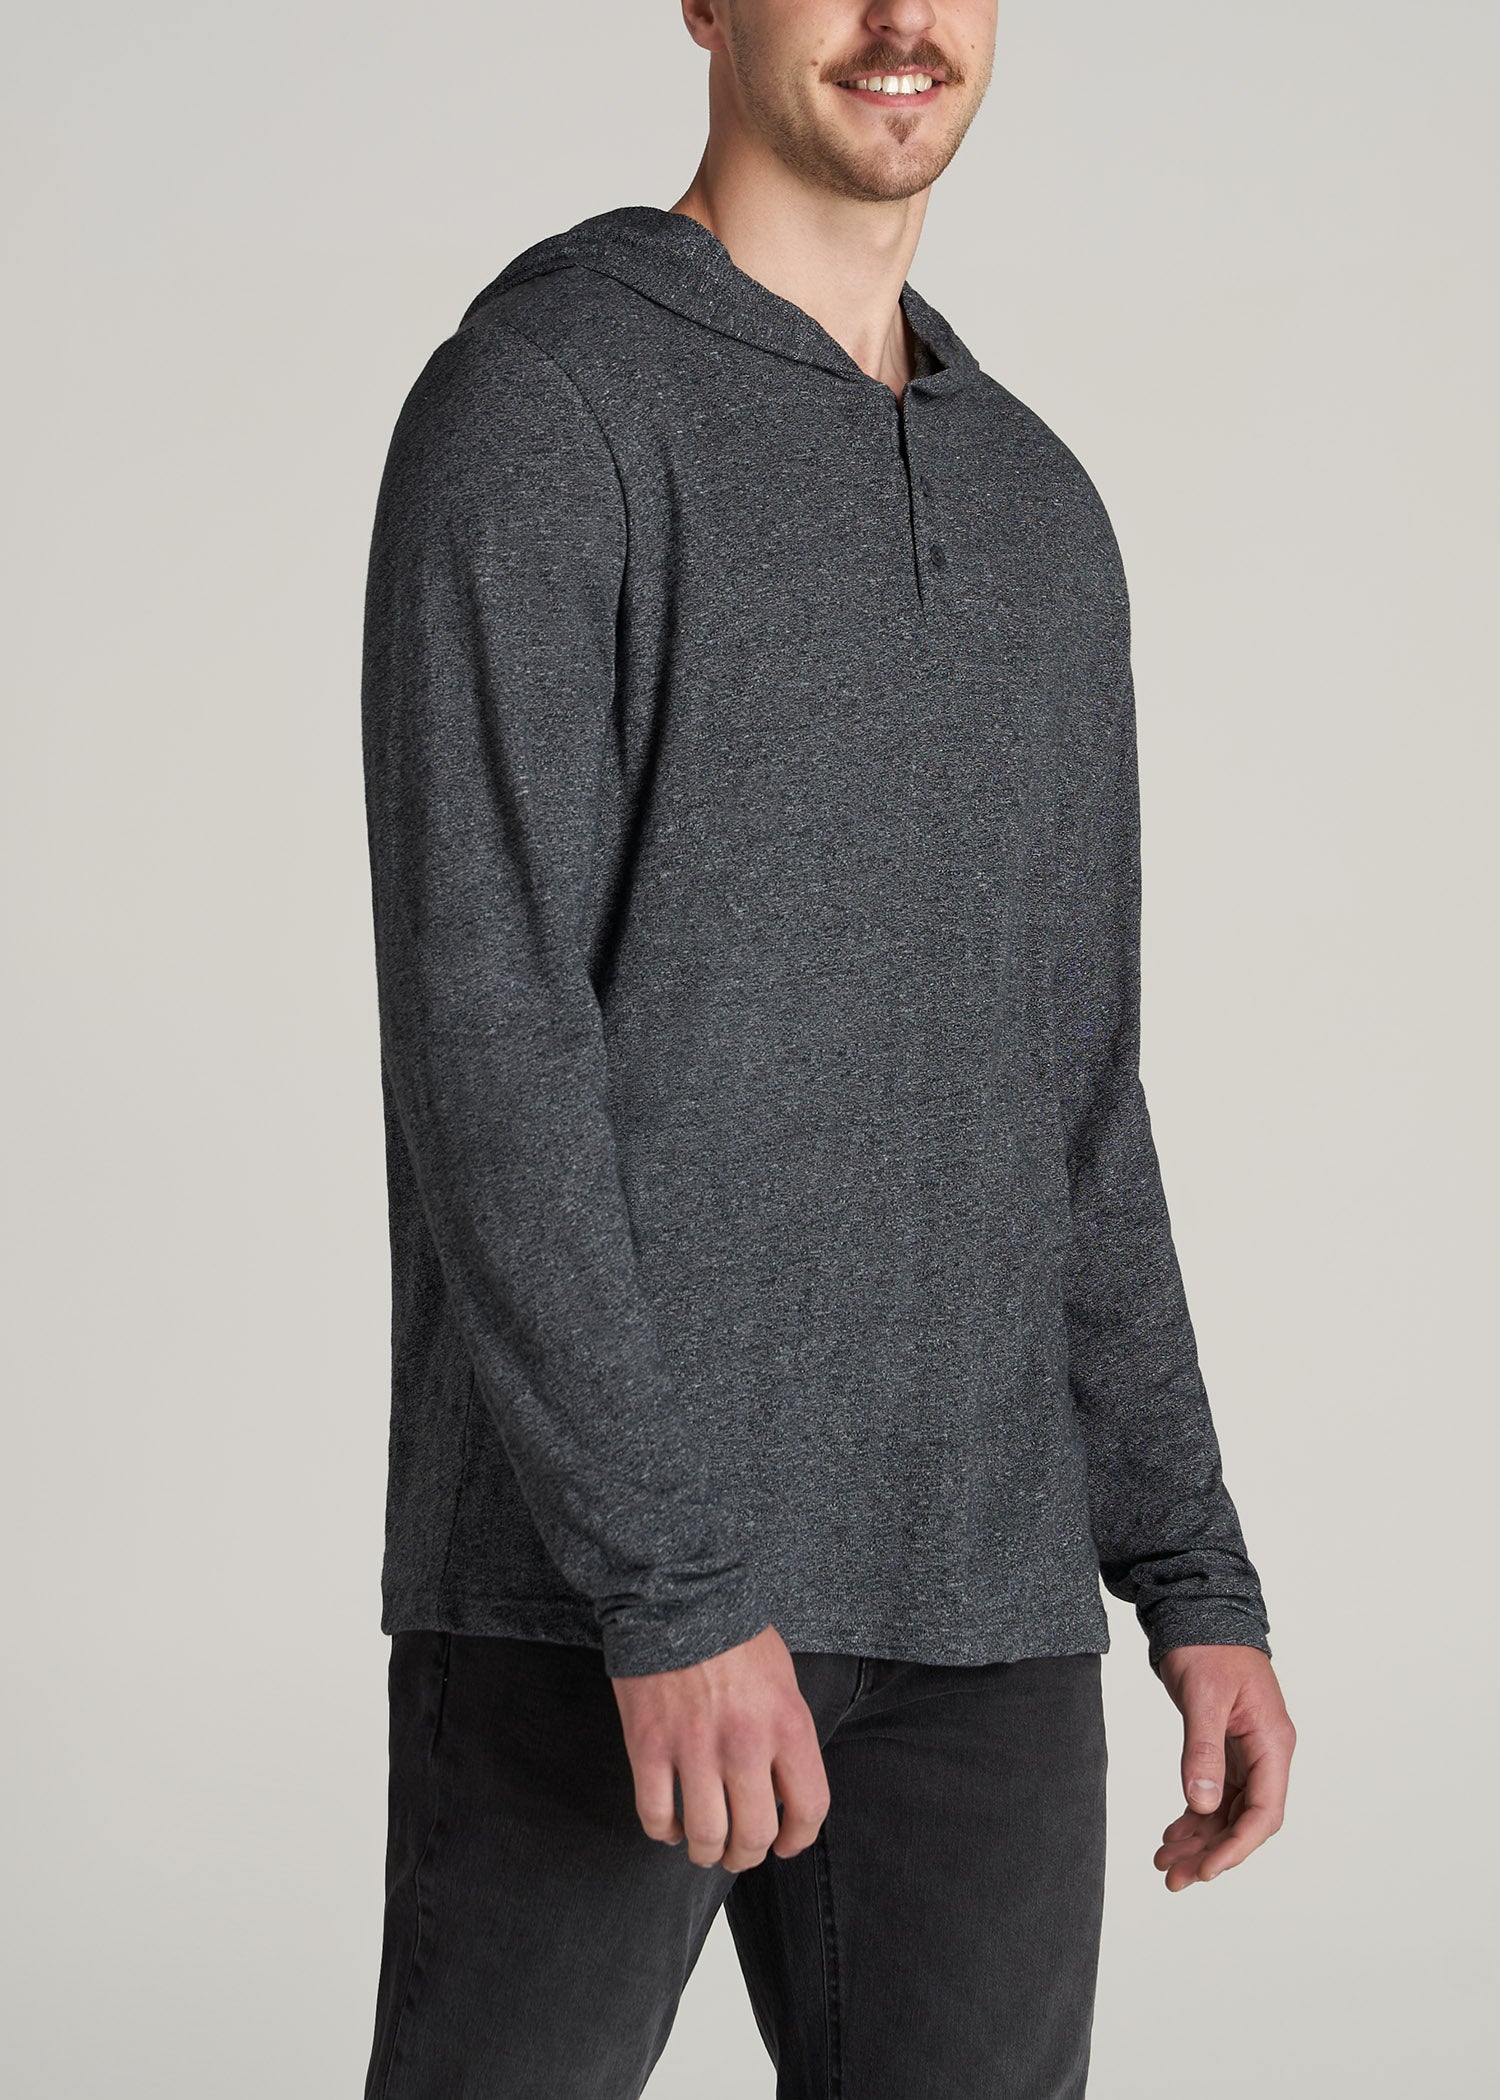 Waffle Sweater for Tall Men in Charcoal Mix